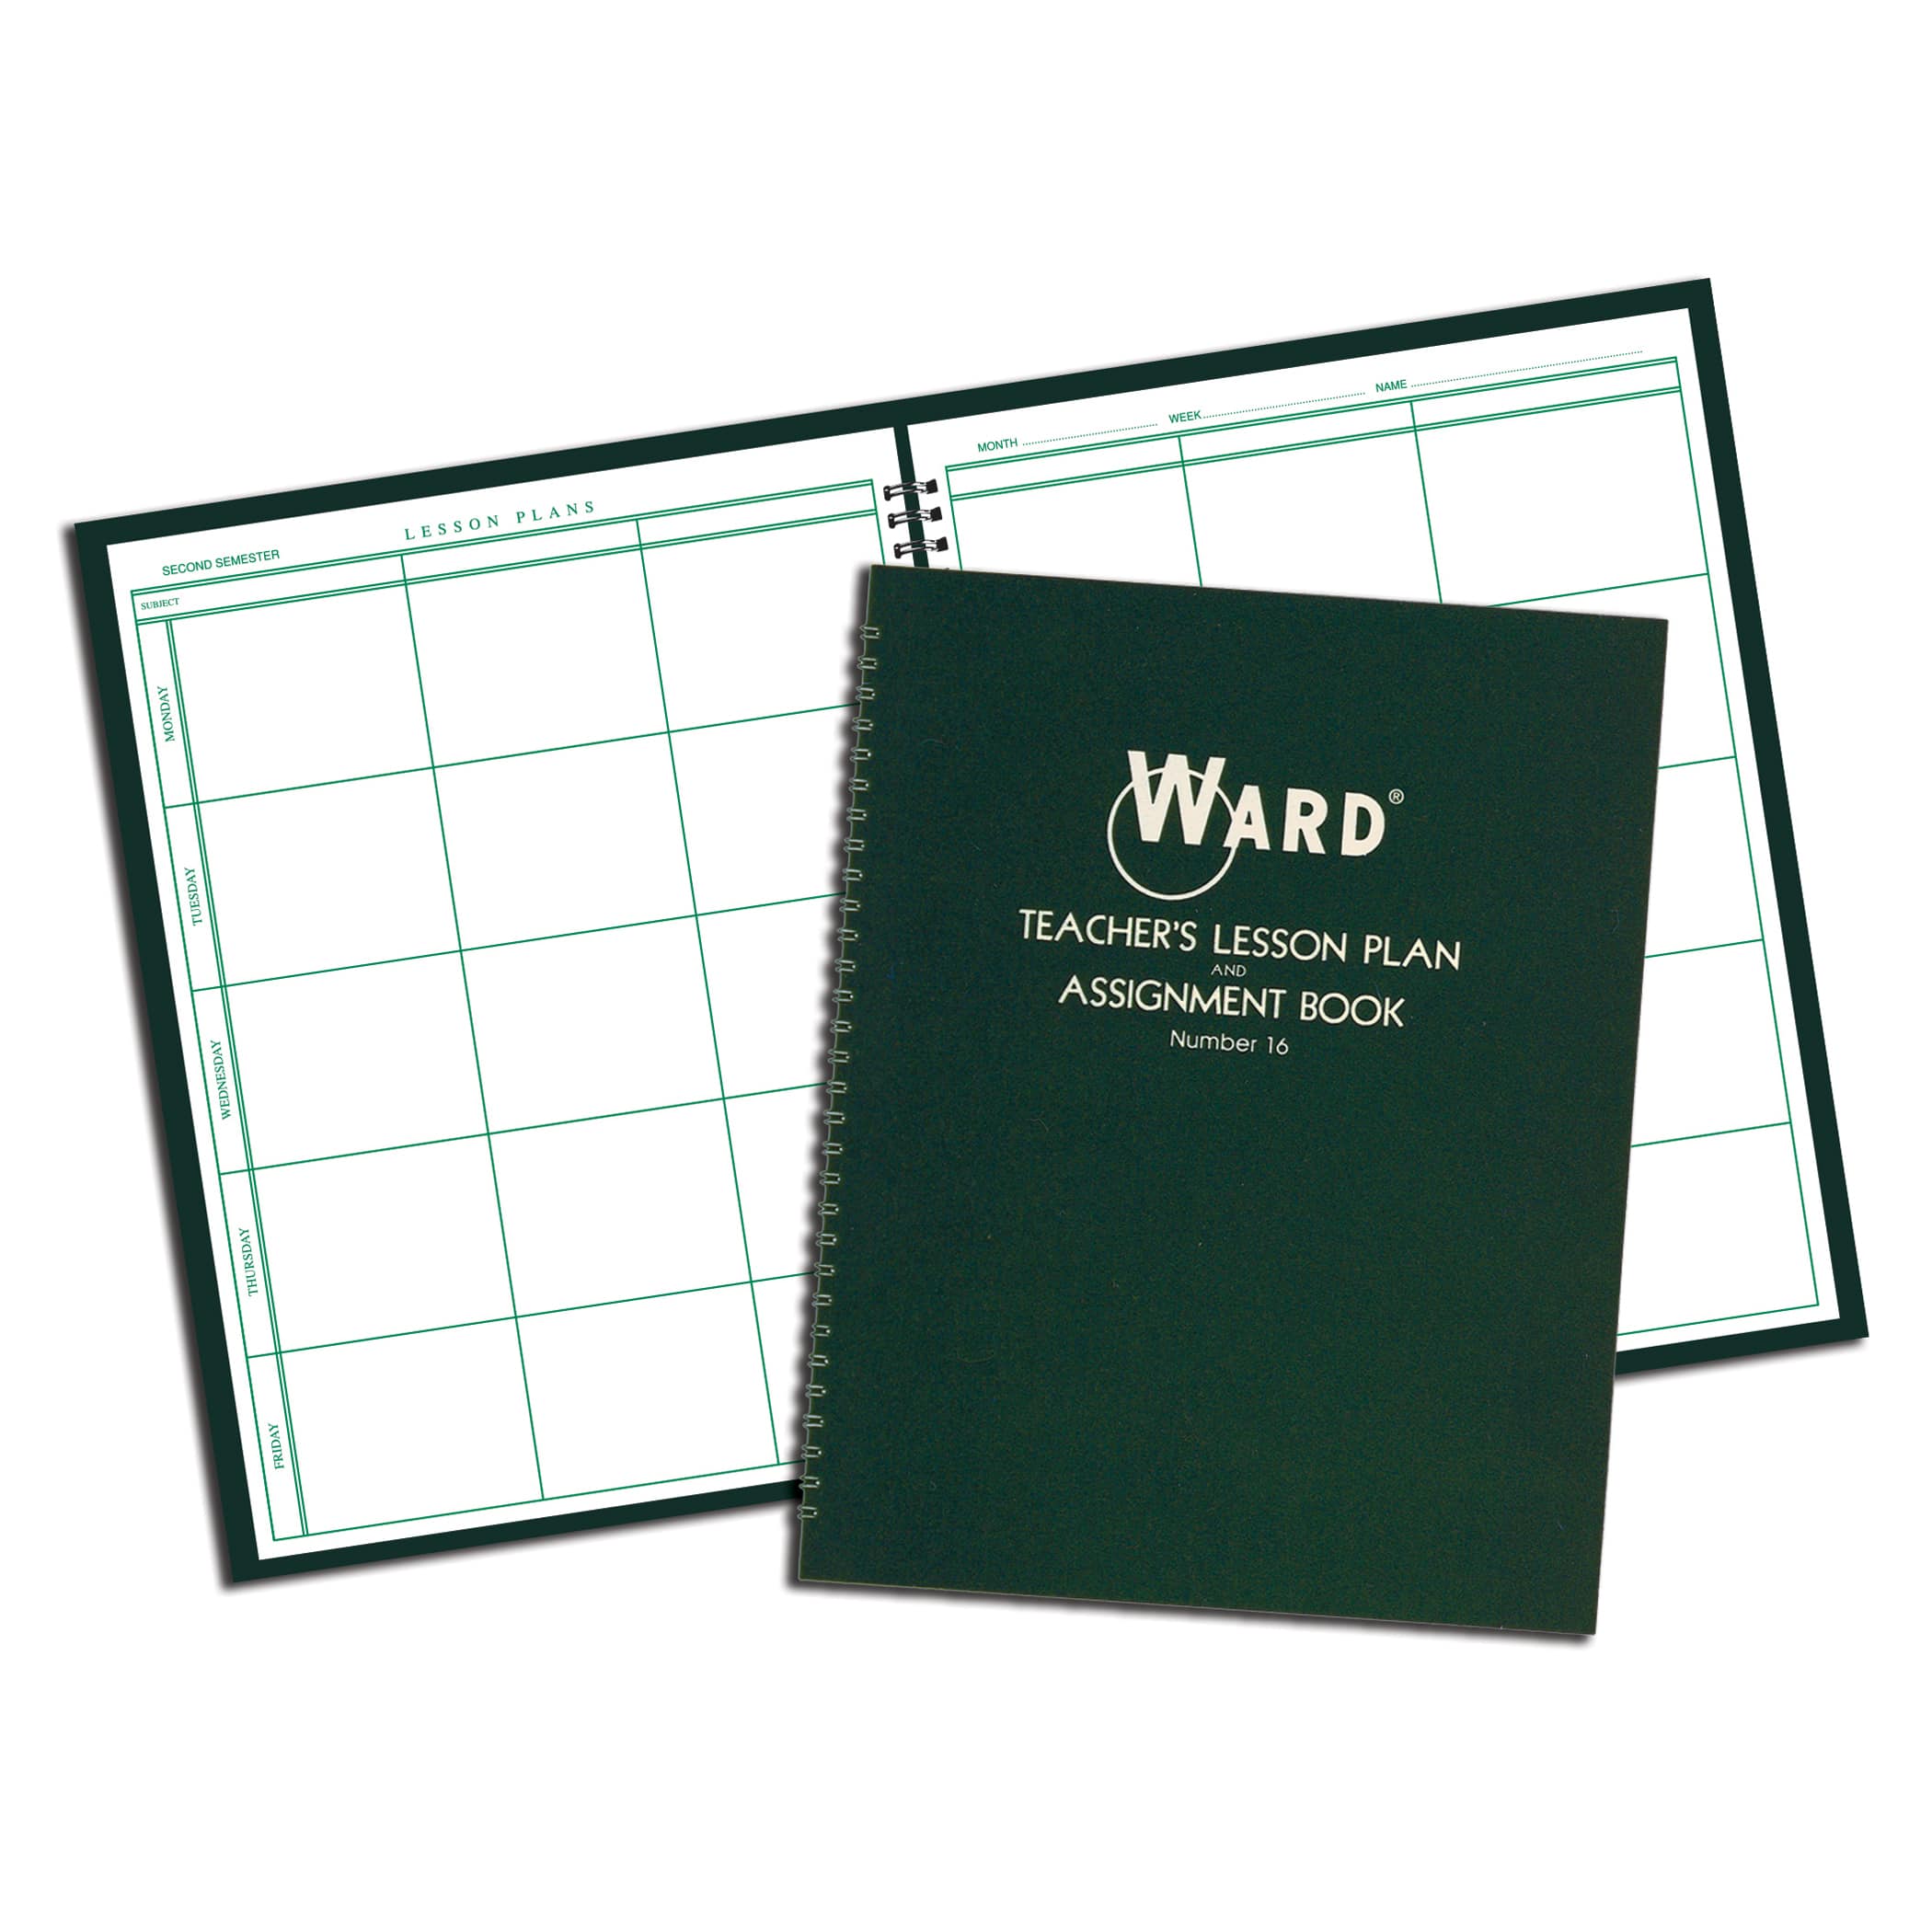 Shop for WARD® Class Lesson Plan Book, 6 Period Regular, Pack of 4 at Michaels.com